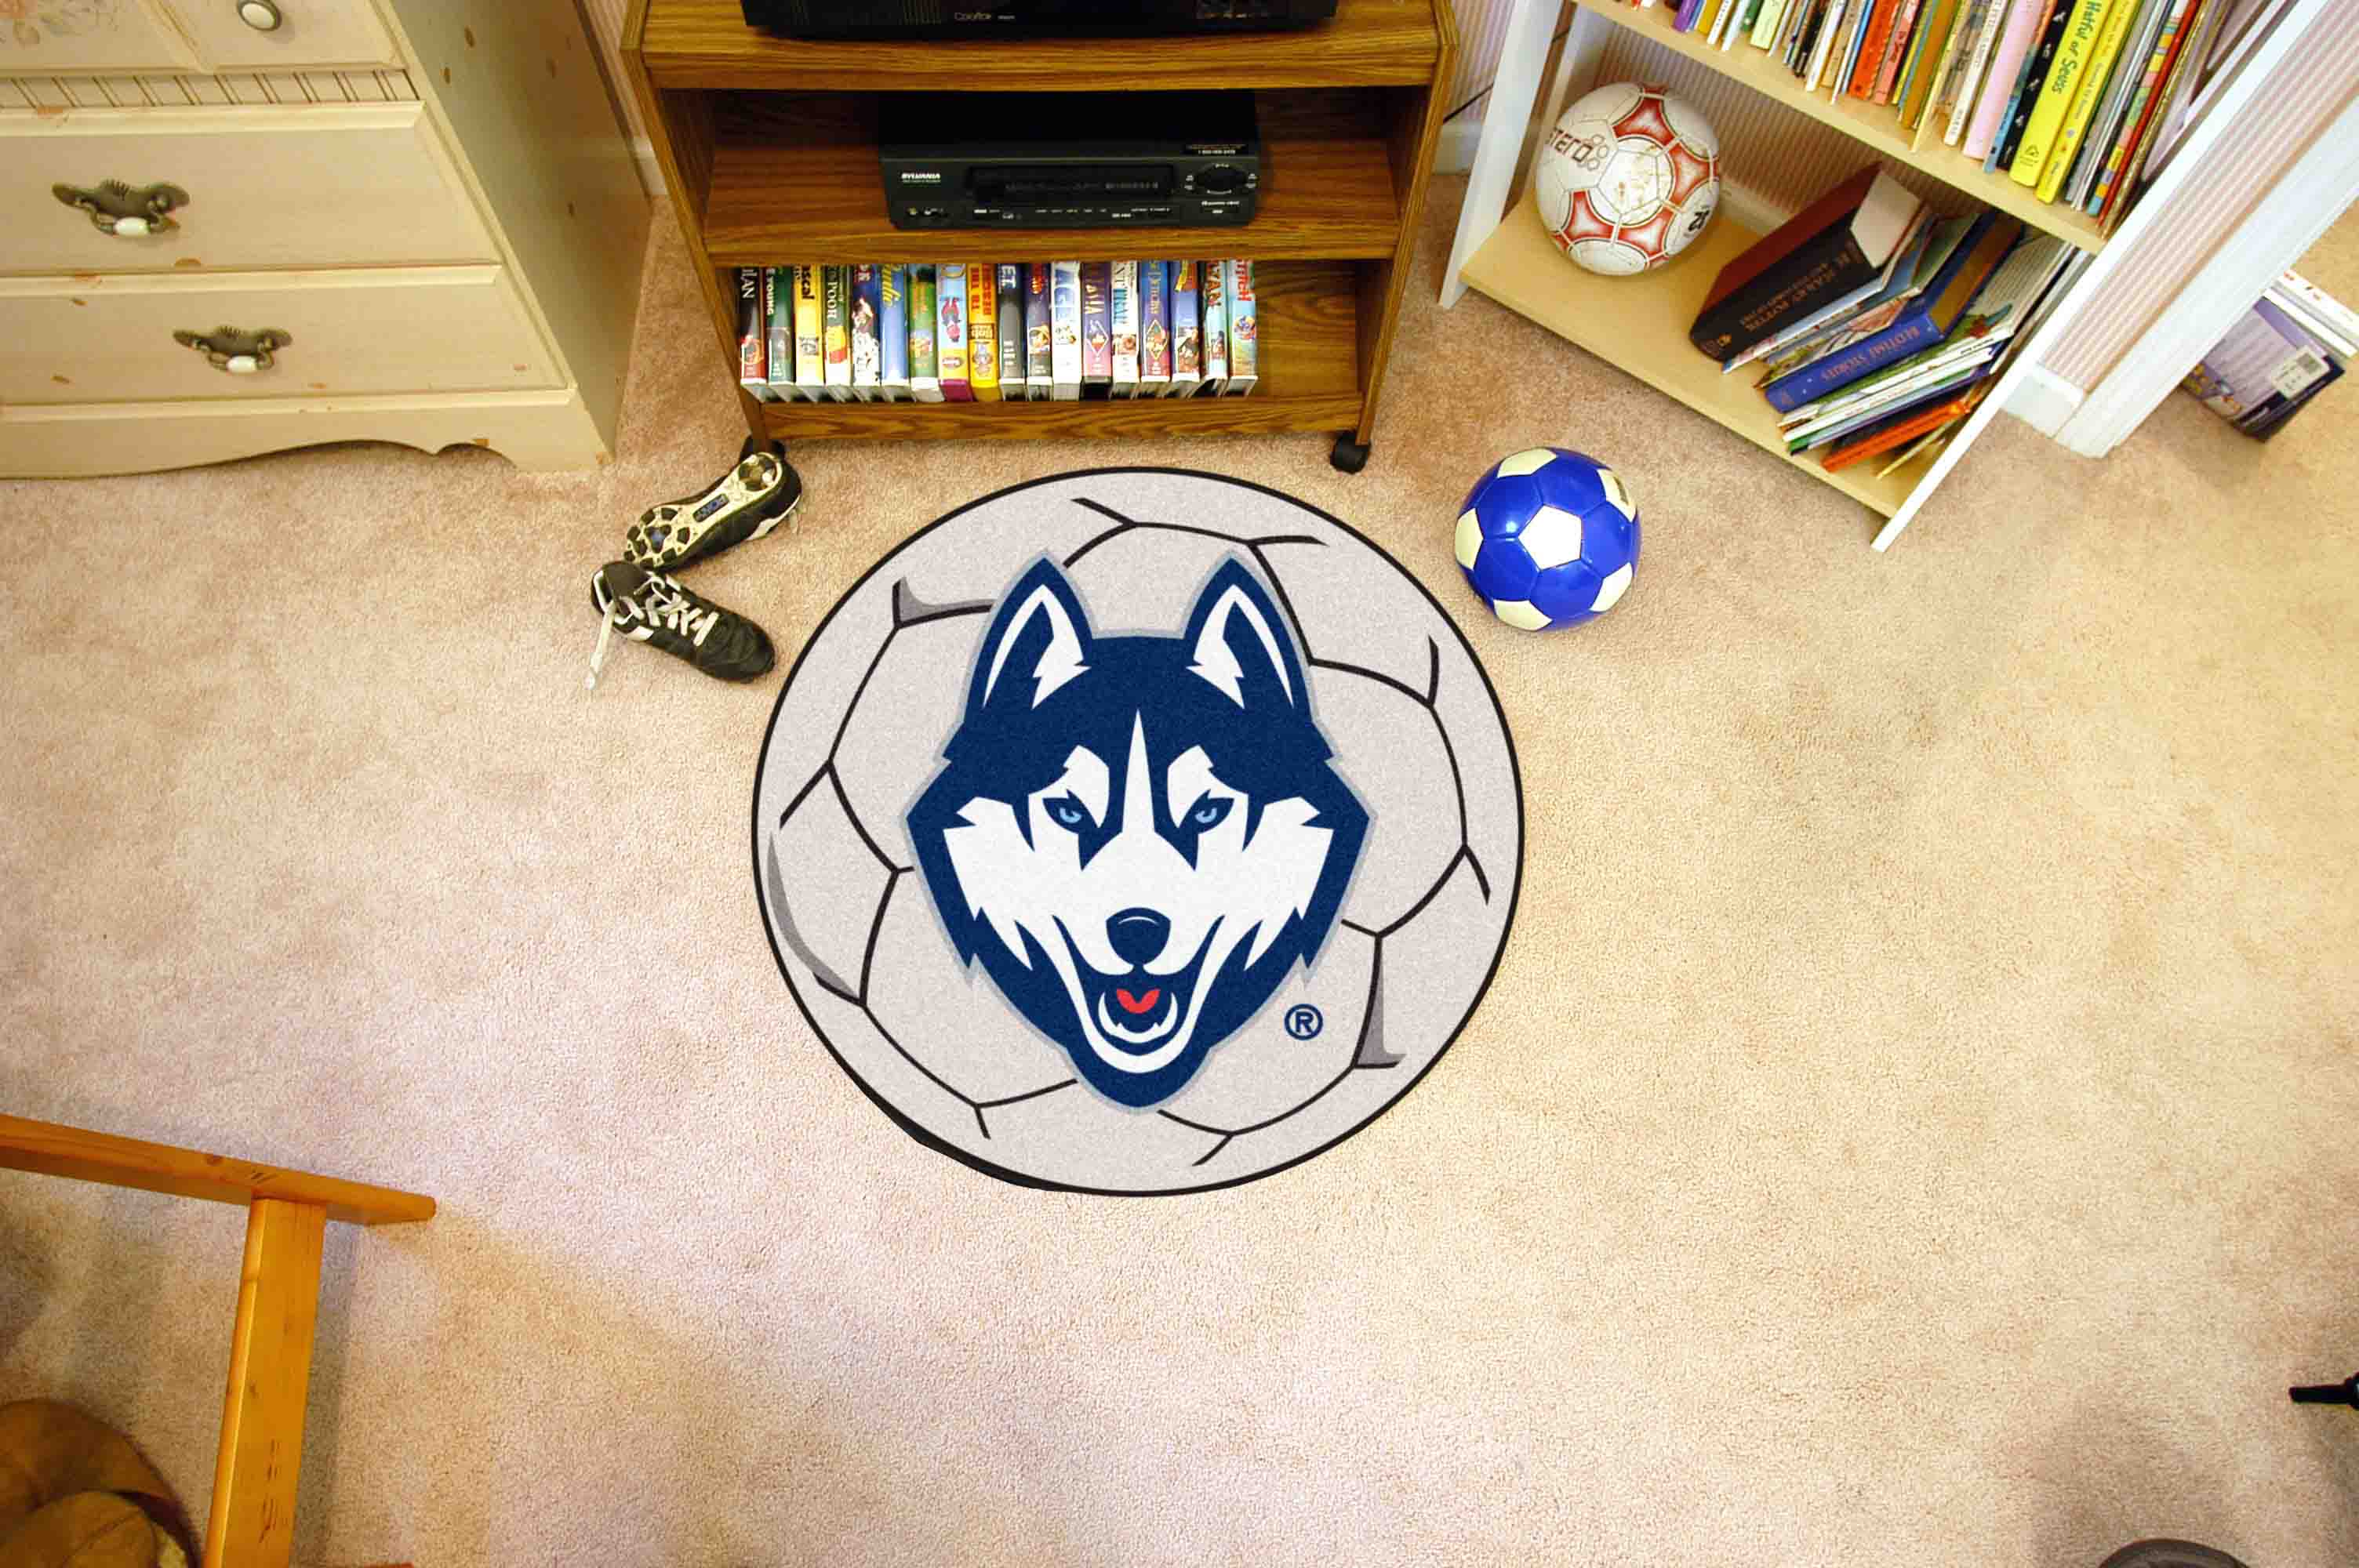 University of Connecticut Ball Shaped Area Rugs (Ball Shaped Area Rugs: Soccer Ball)